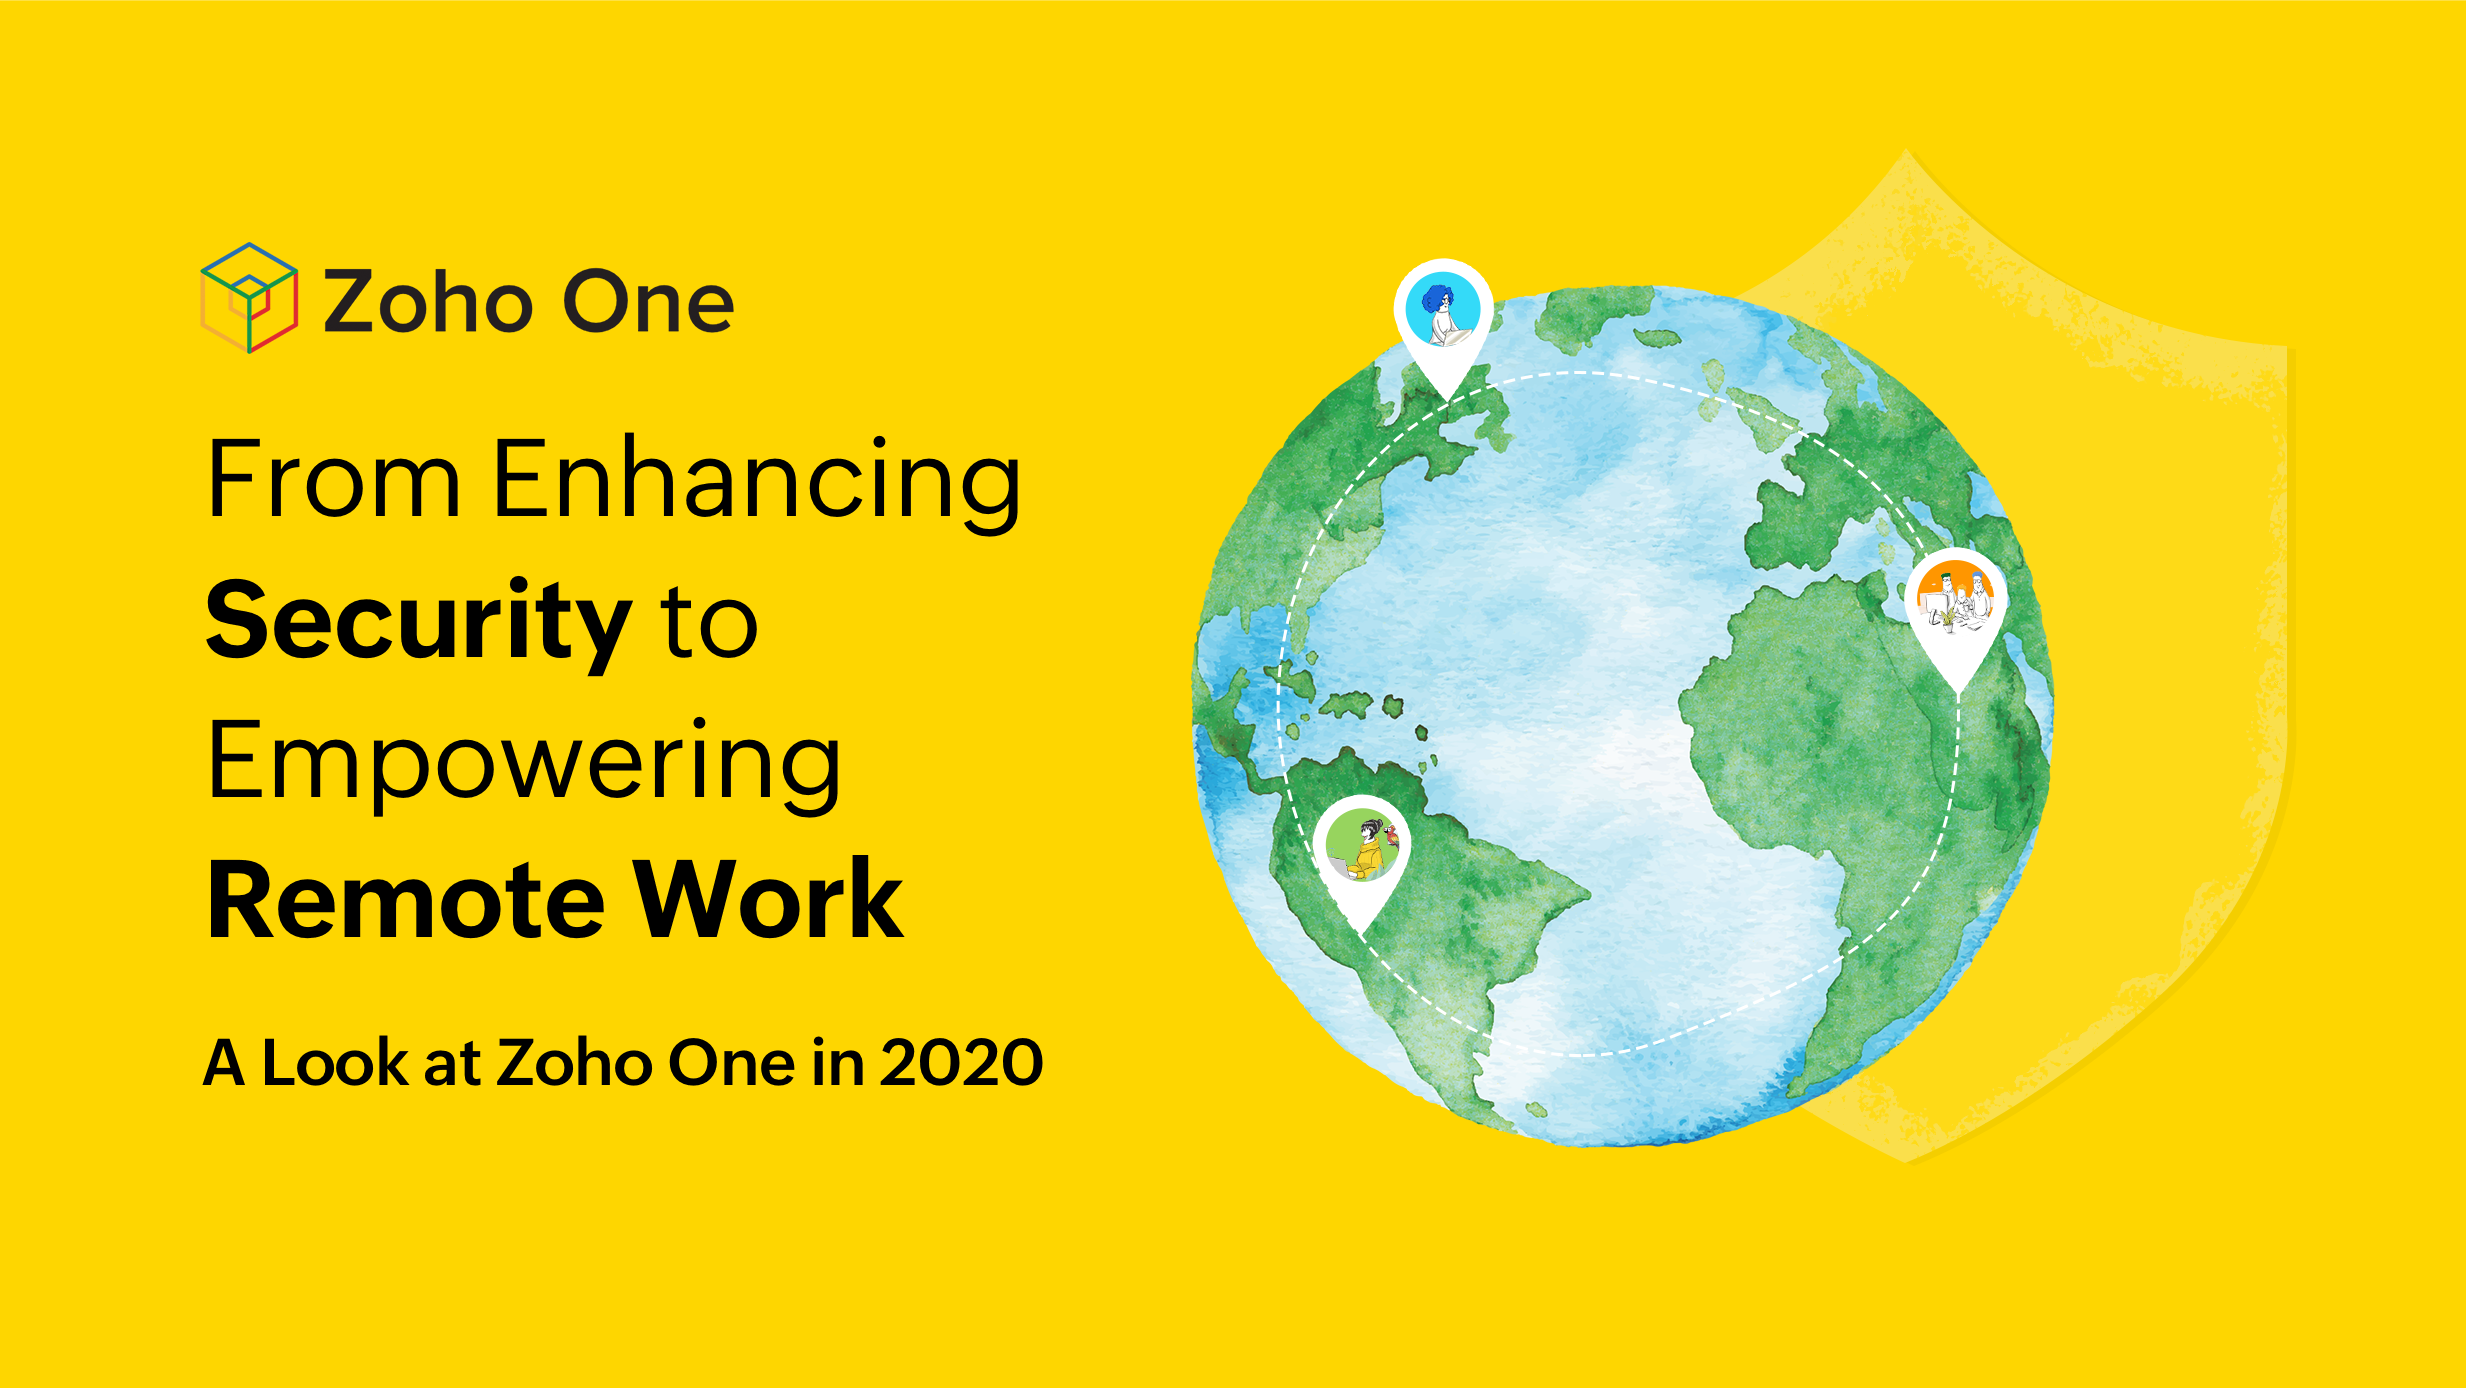 Zoho One Product Updates in 2020